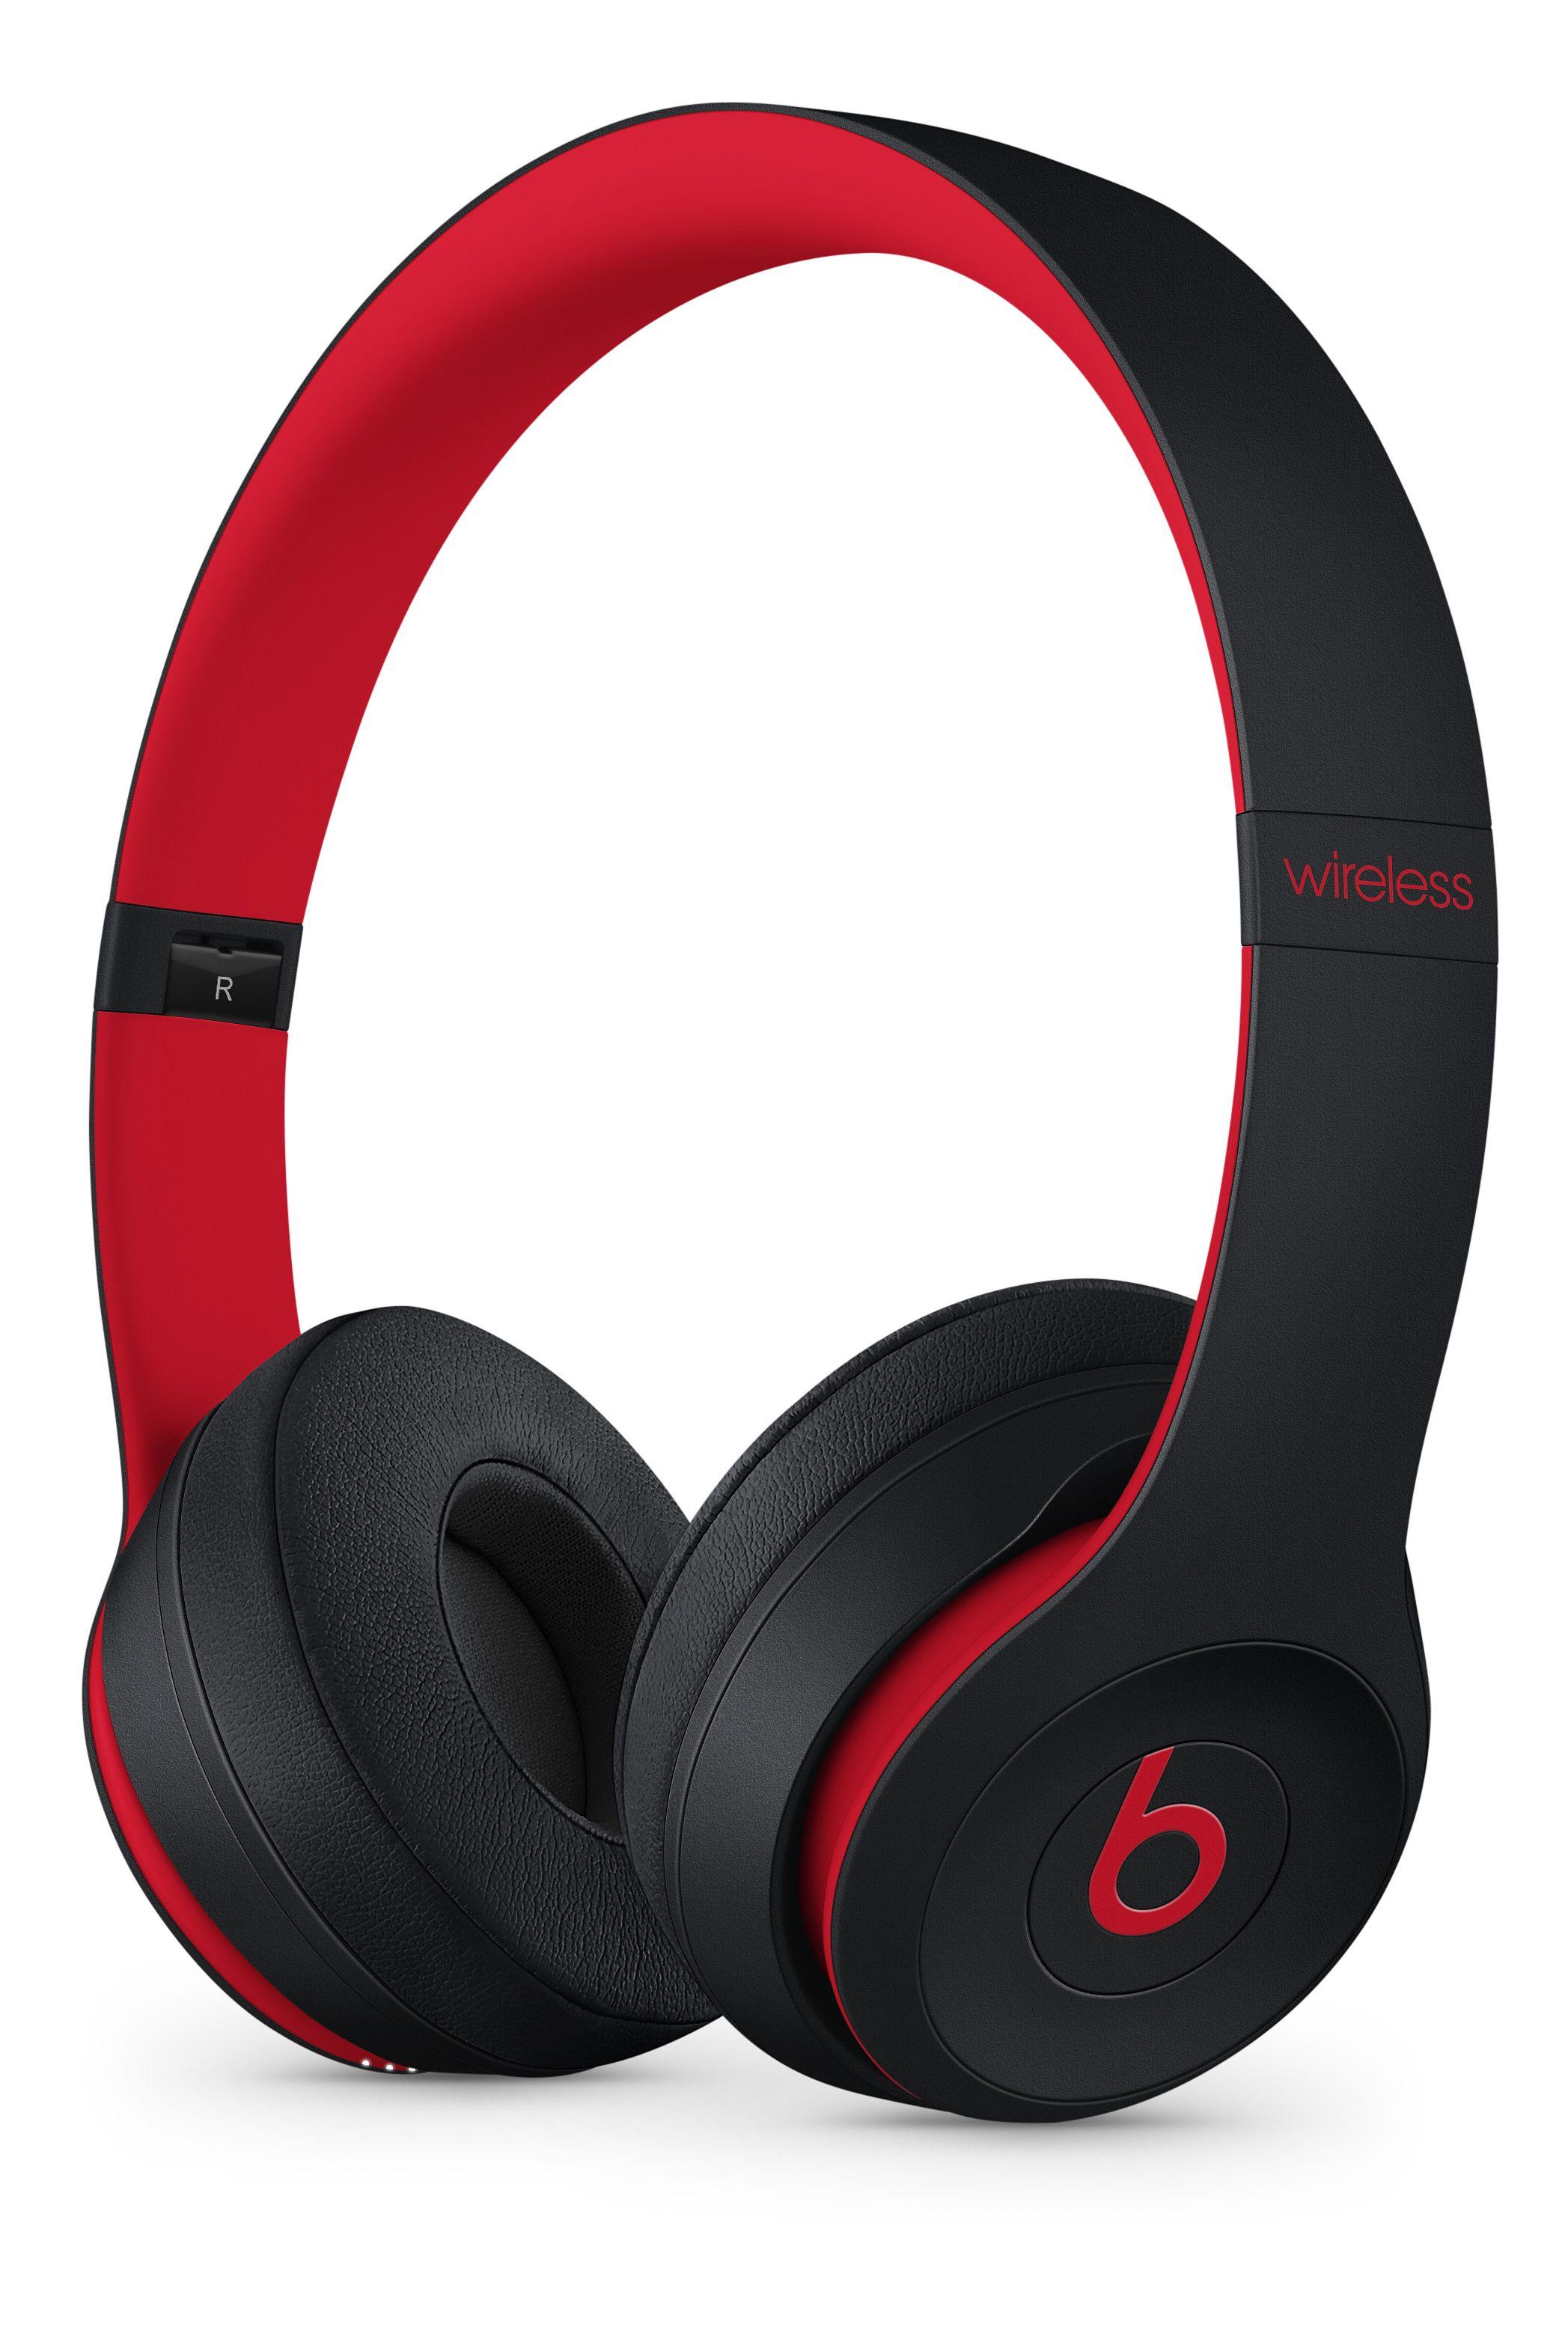 Red and Black Beats Logo - Beats Solo3 Wireless - Defiant Black-Red - Apple (UK)